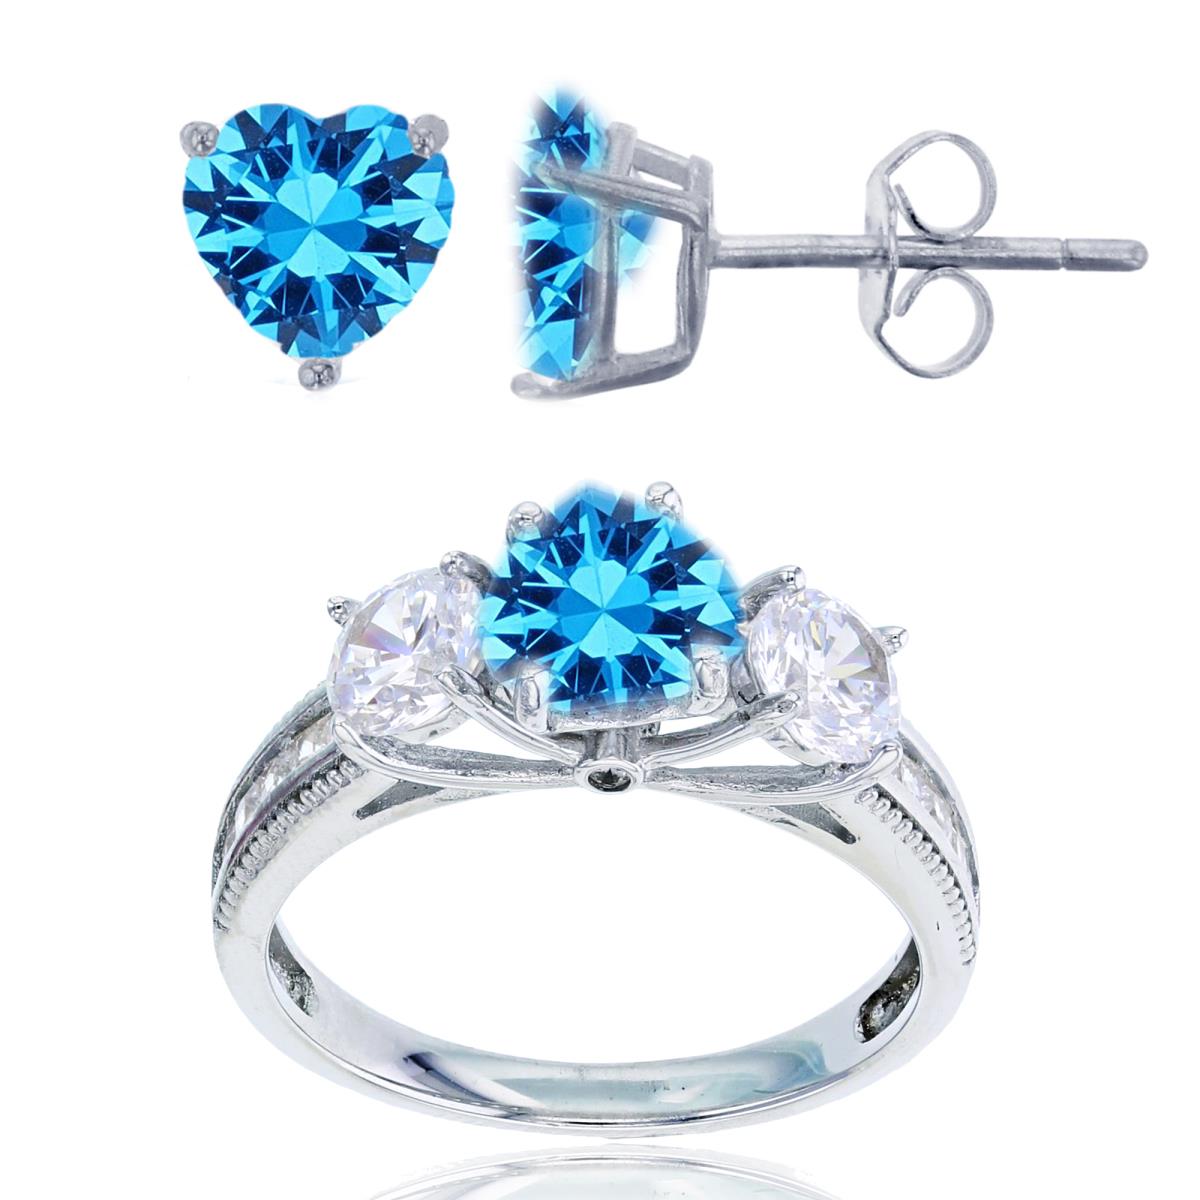 Sterling Silver Rhodium 3-Stone 7mm Swiss Blue Hrt & 5mm Rd CZ Ring & 6mm Hrt Solitaire Stud Earring Set